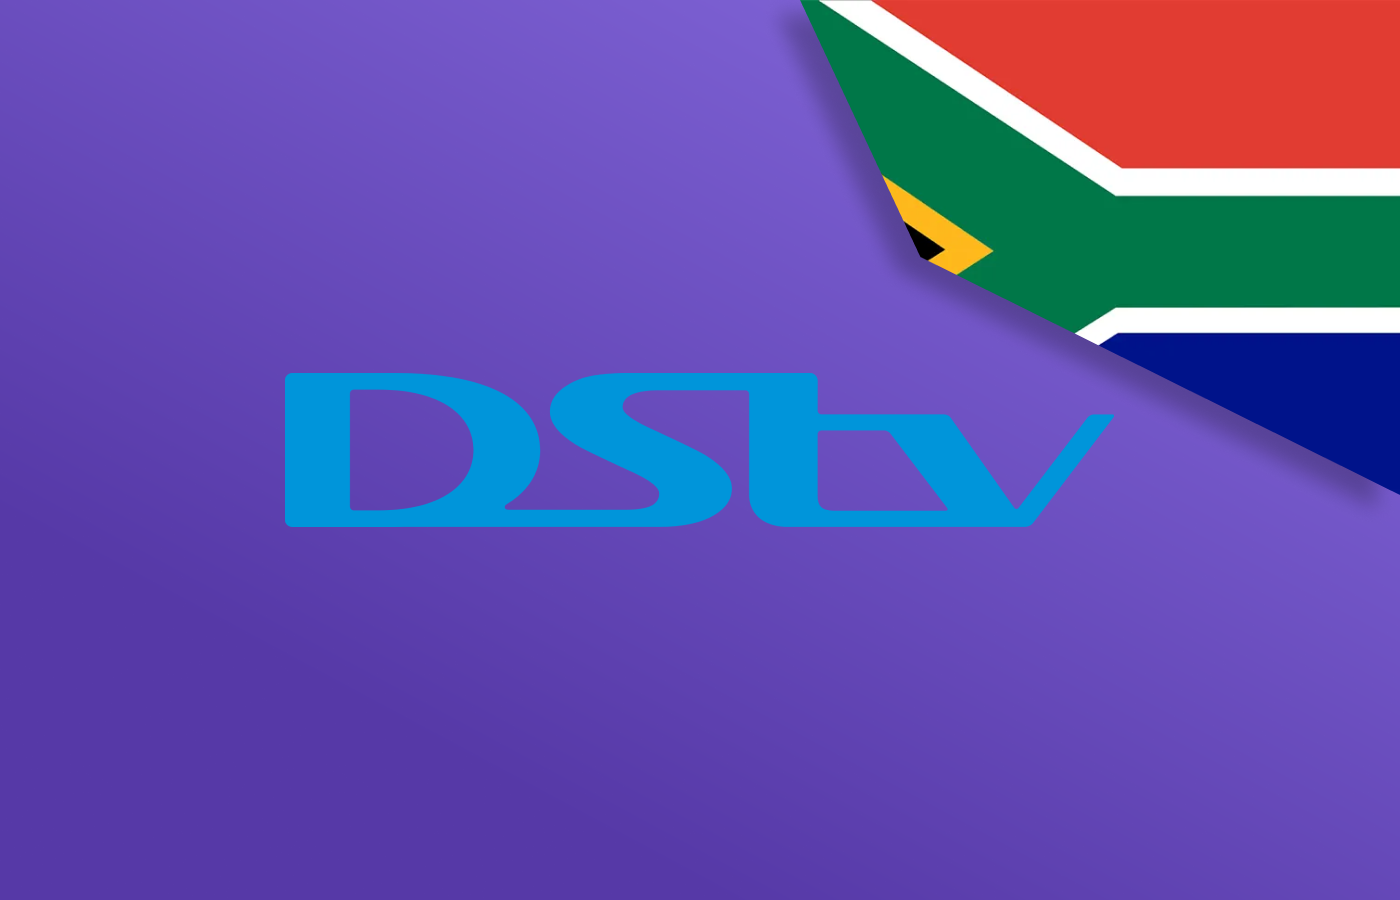 Watch DStv Outside South Africa